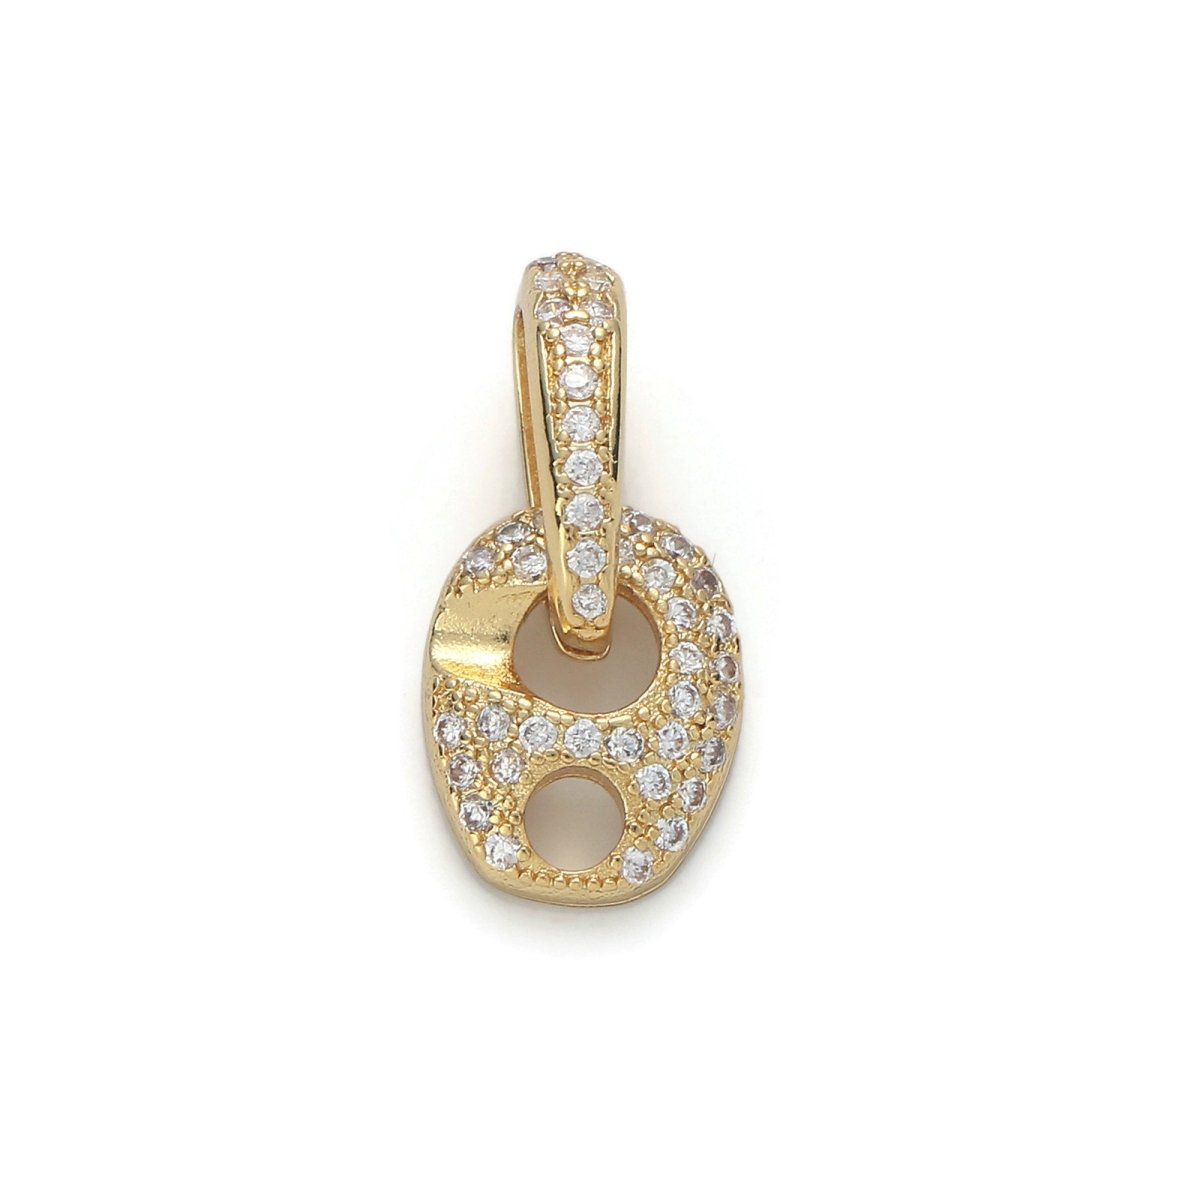 24k Gold Filled Micro Pave CZ Geometric Pendant Charm, Micro Pave Soda Cap Earring Pendant Charm, Gold Filled Pendant, For DIY Jewelry K-553 - DLUXCA